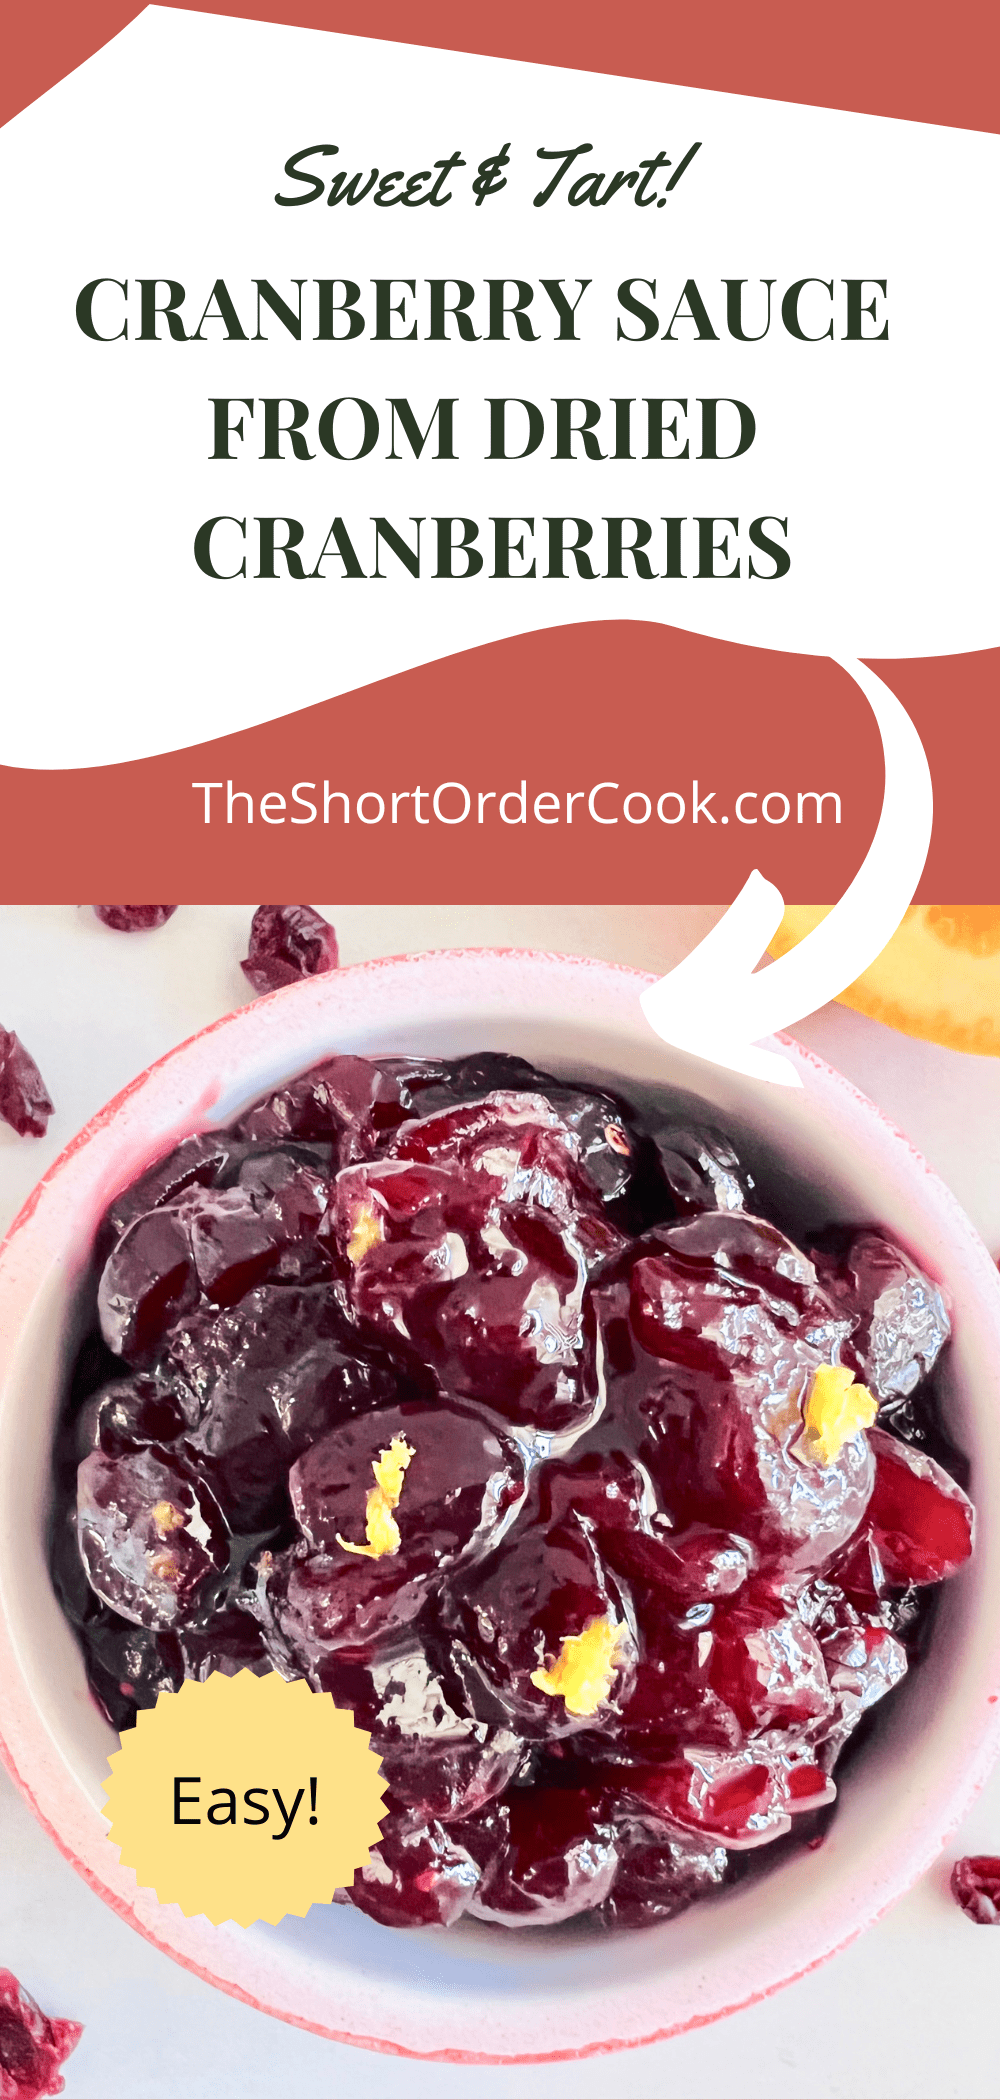 Cranberry sauce topped with orange zest in a red ramekin.